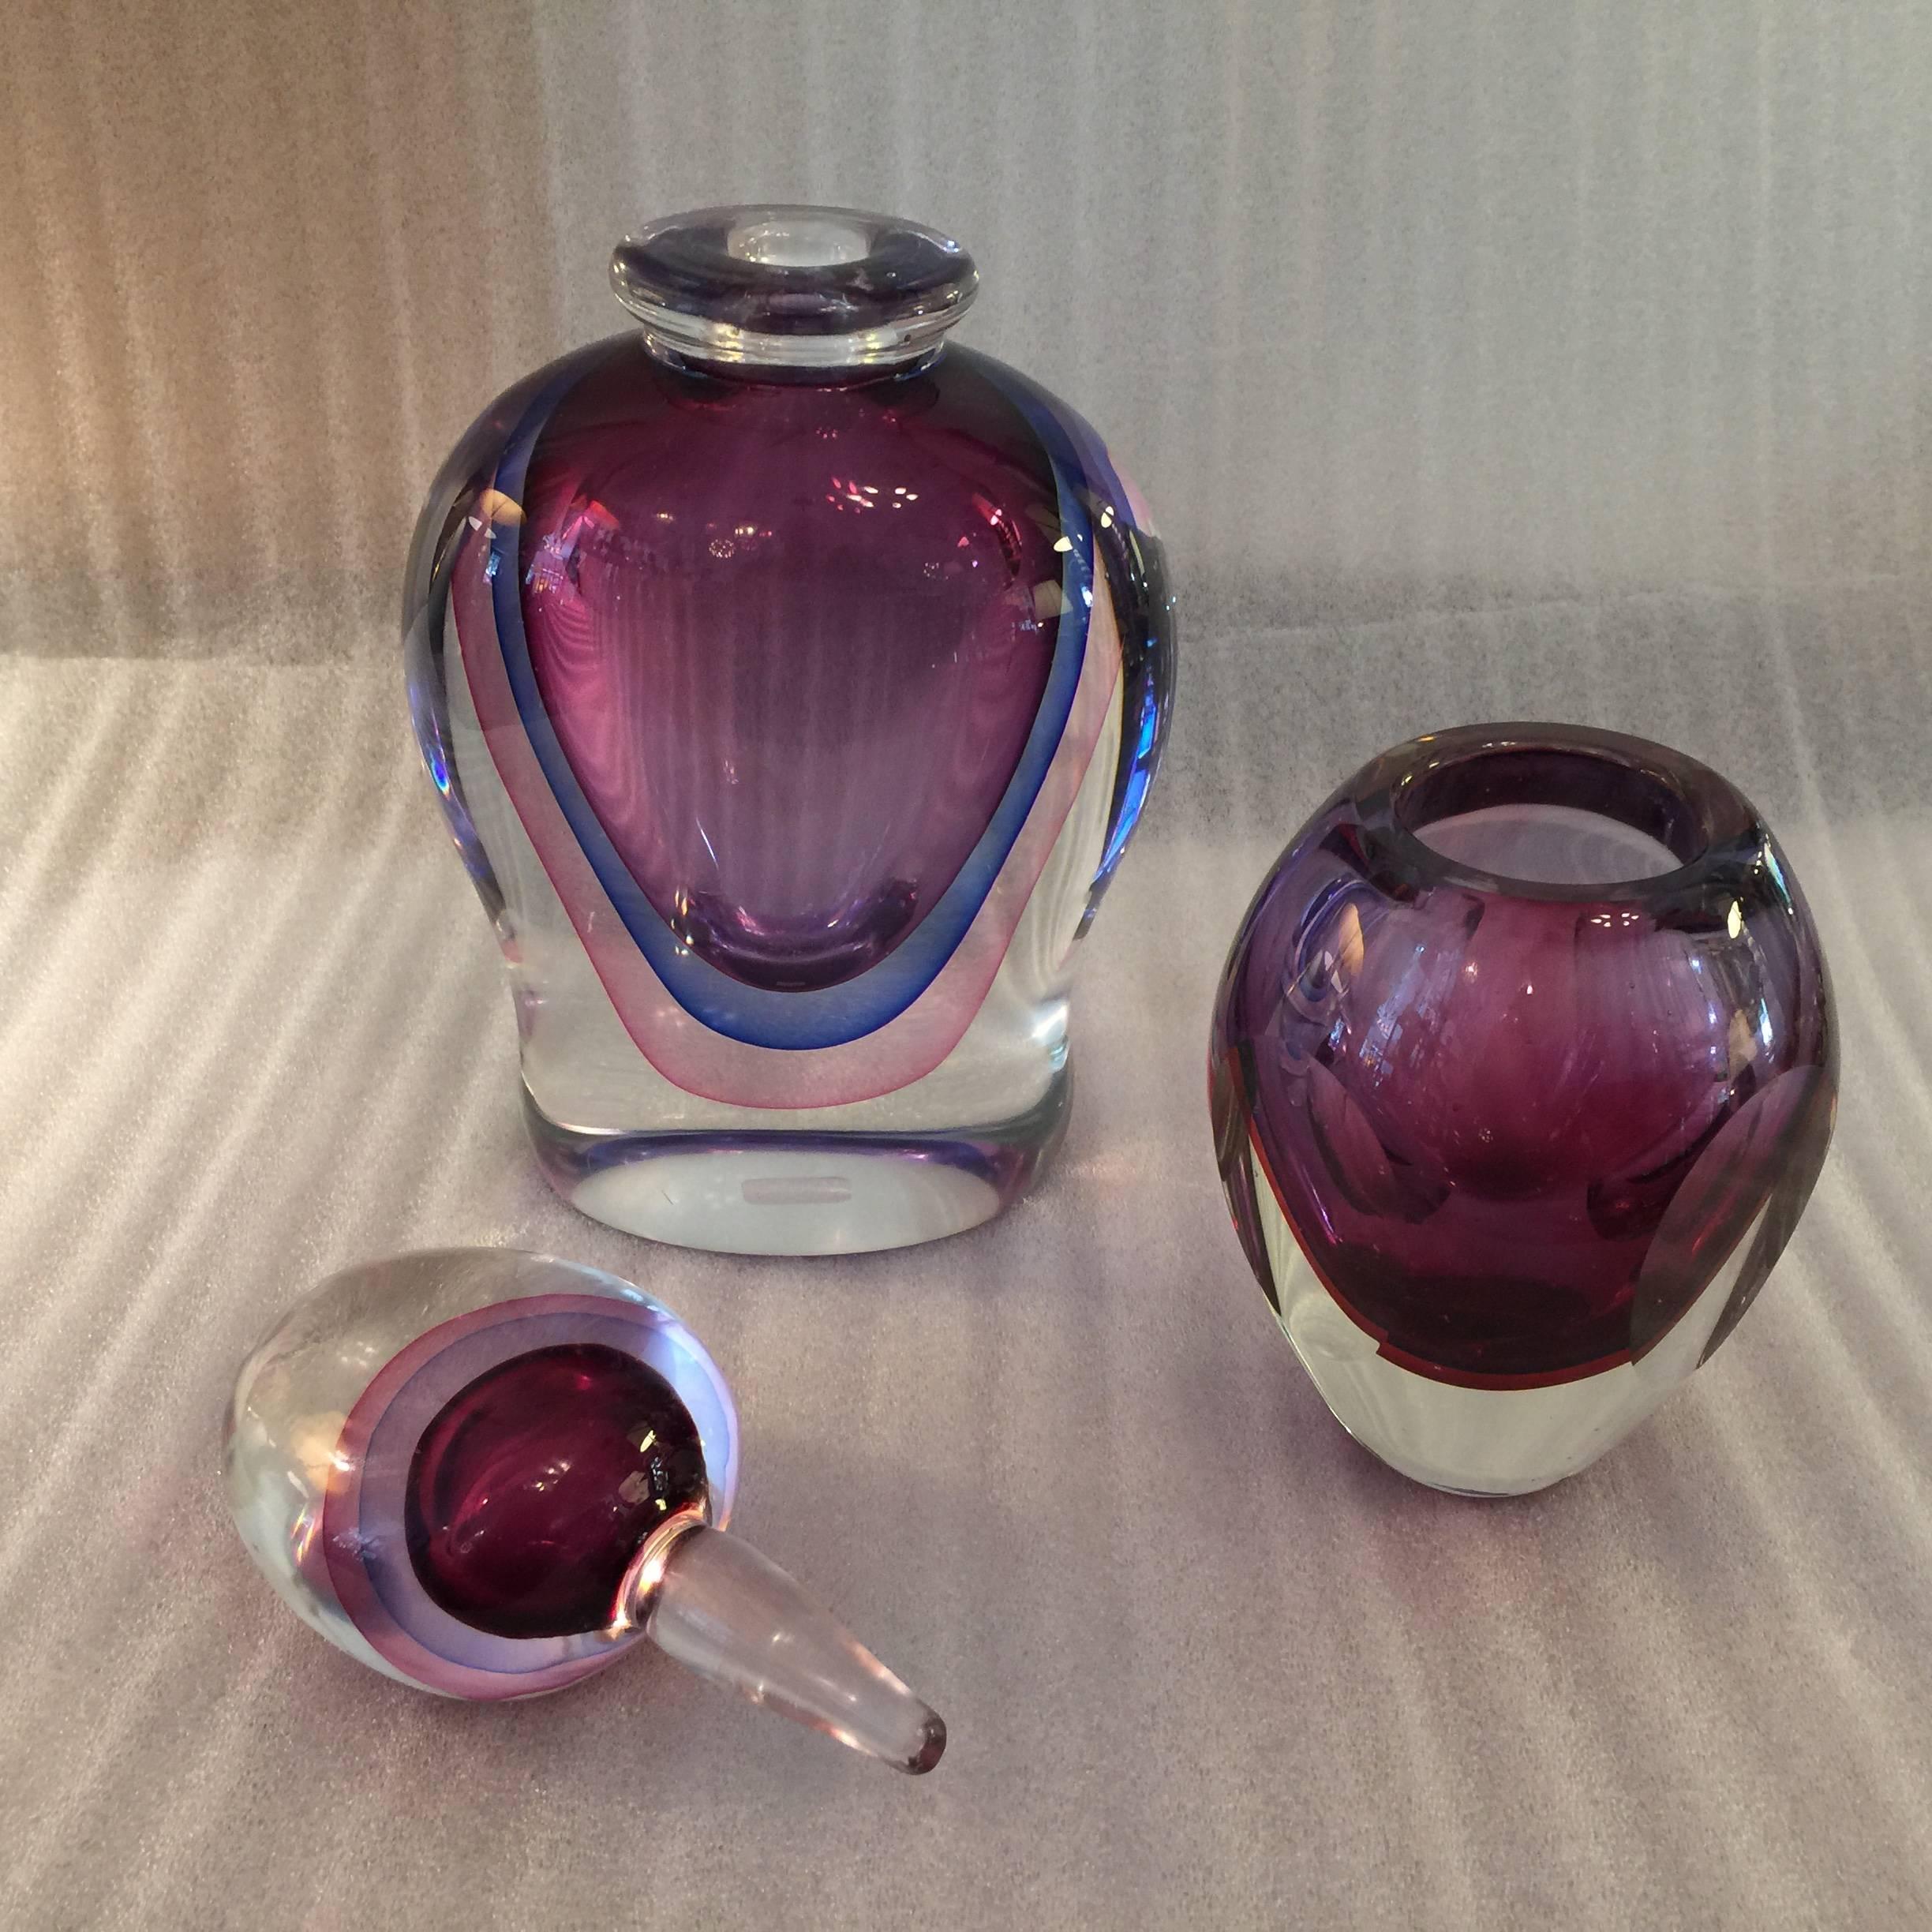 This lovely pair of plum/pink/ blue toned decanter and bud vase by Luigi Onesto.

Vase dimensions: 4 inch D. x 5.5 inch H.